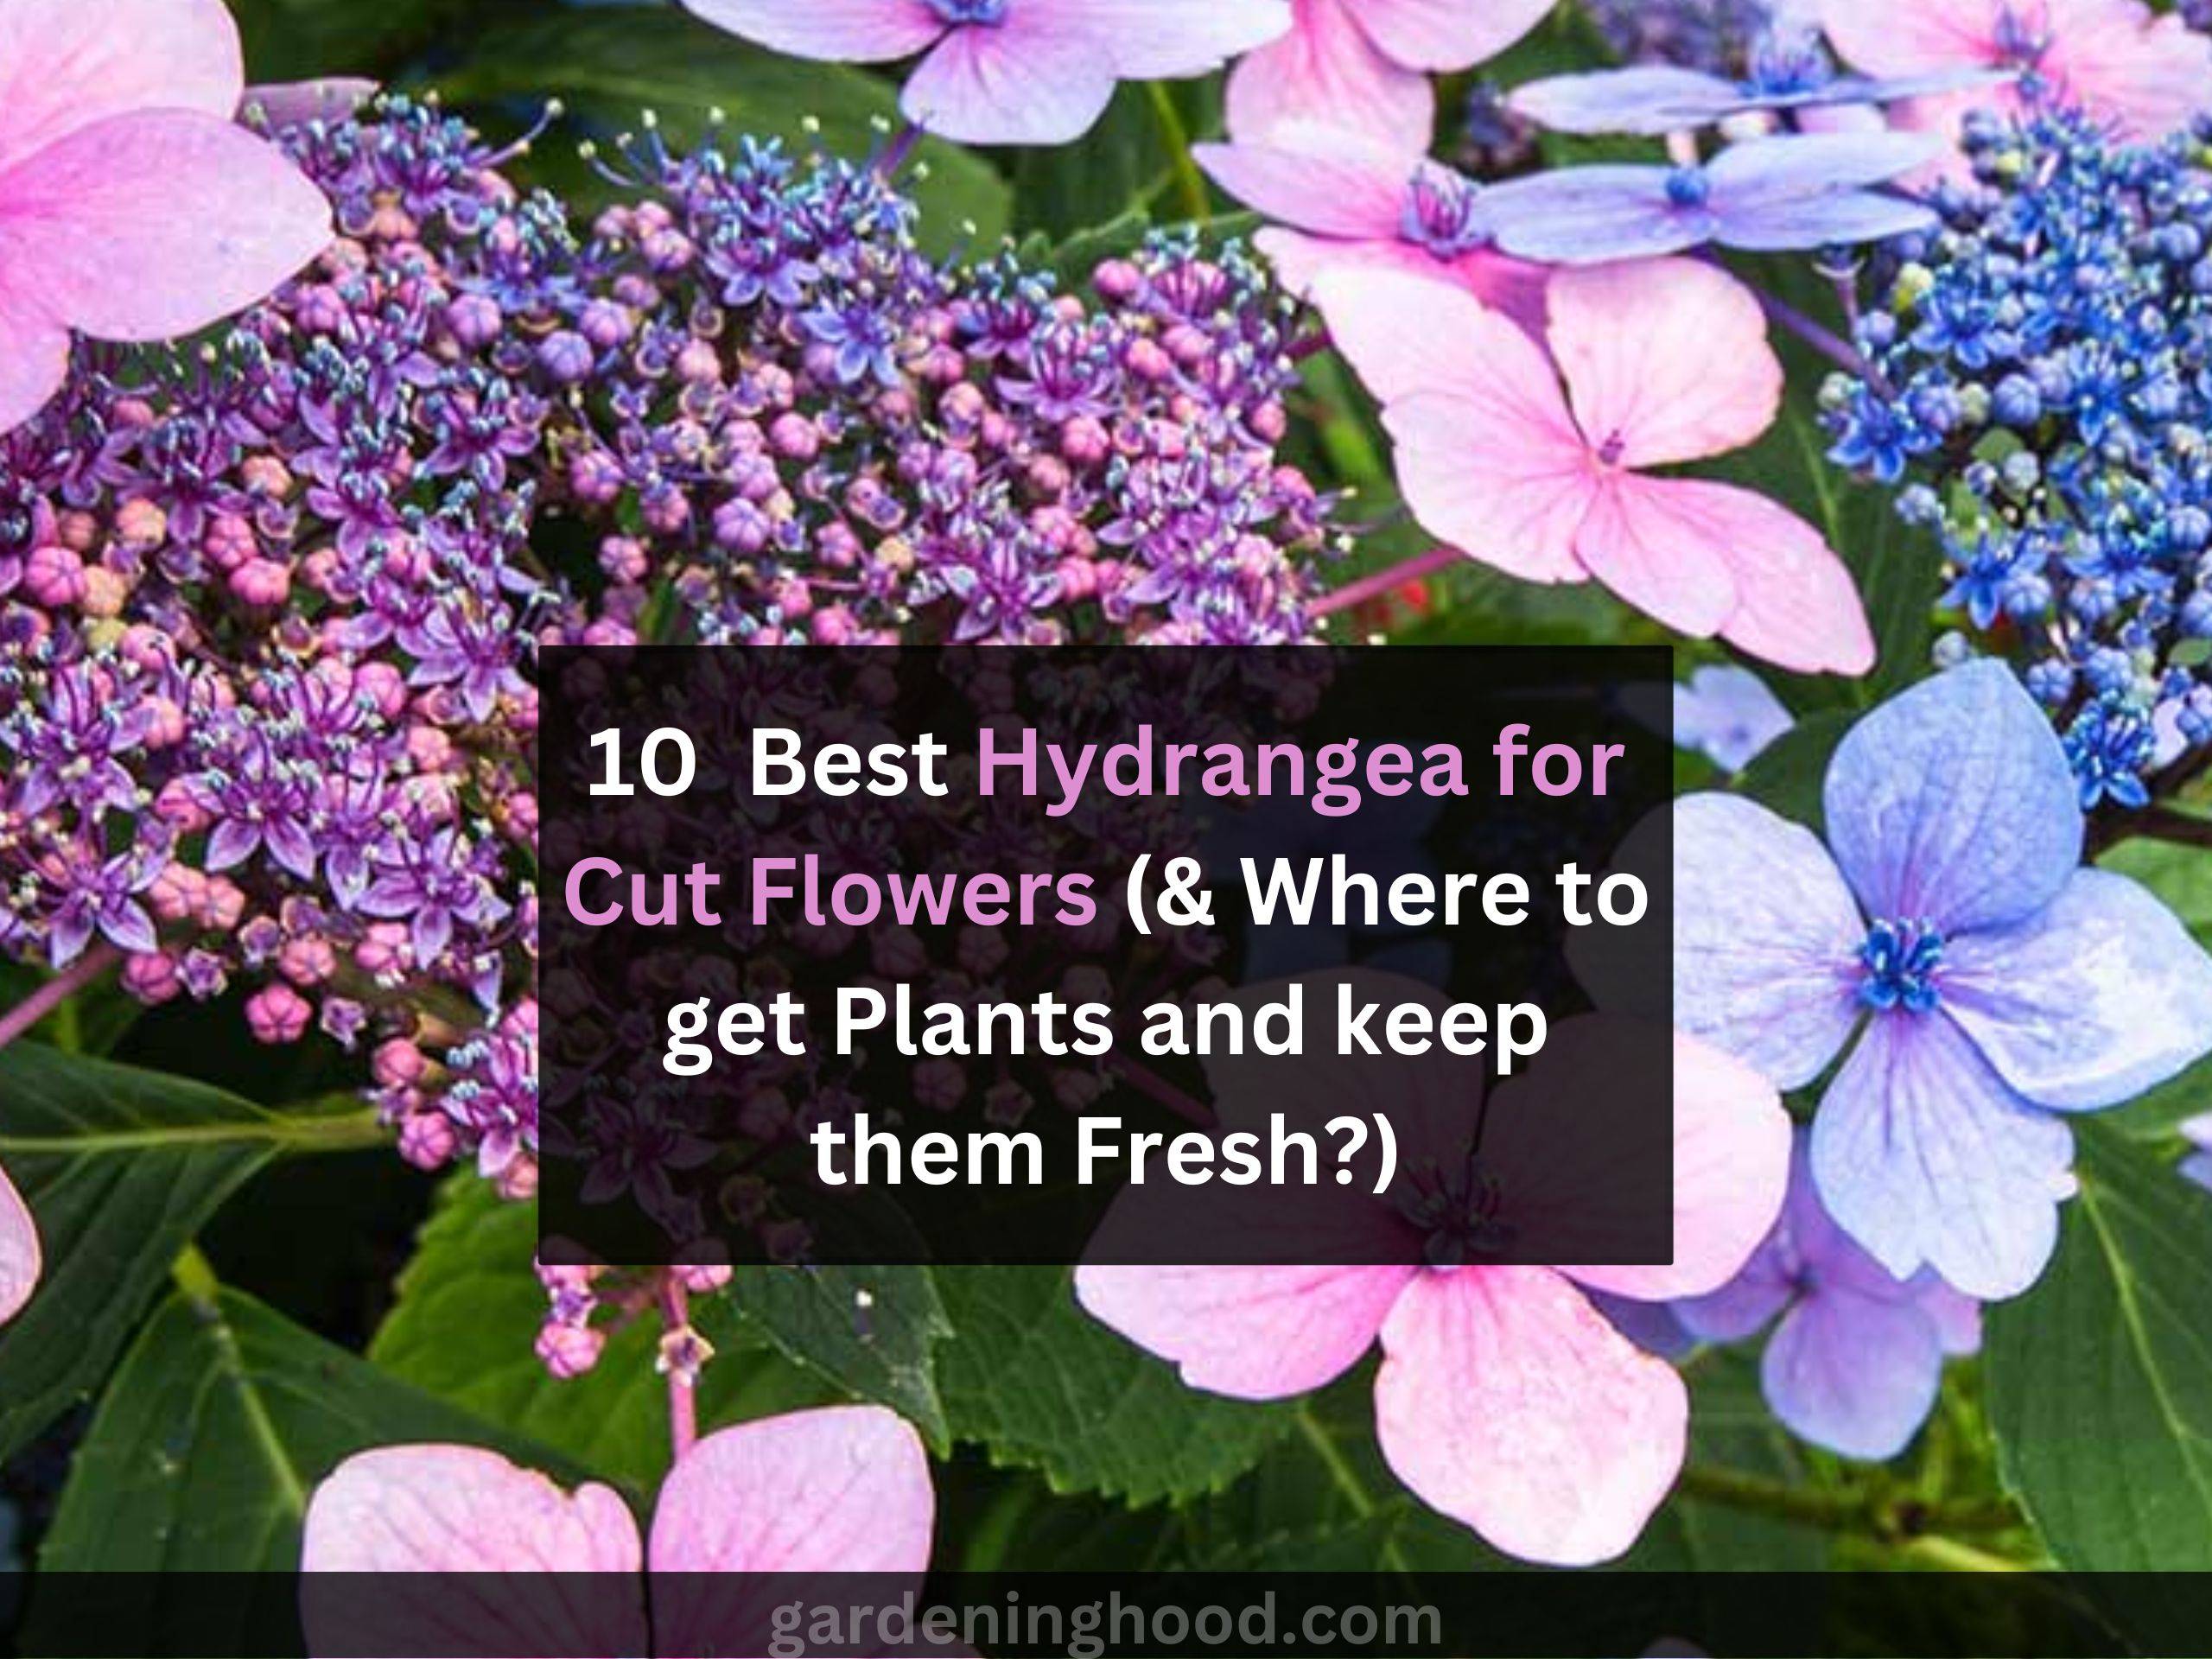 10+ Best Hydrangea for Cut Flowers (& Where to get Plants and keep them Fresh?)